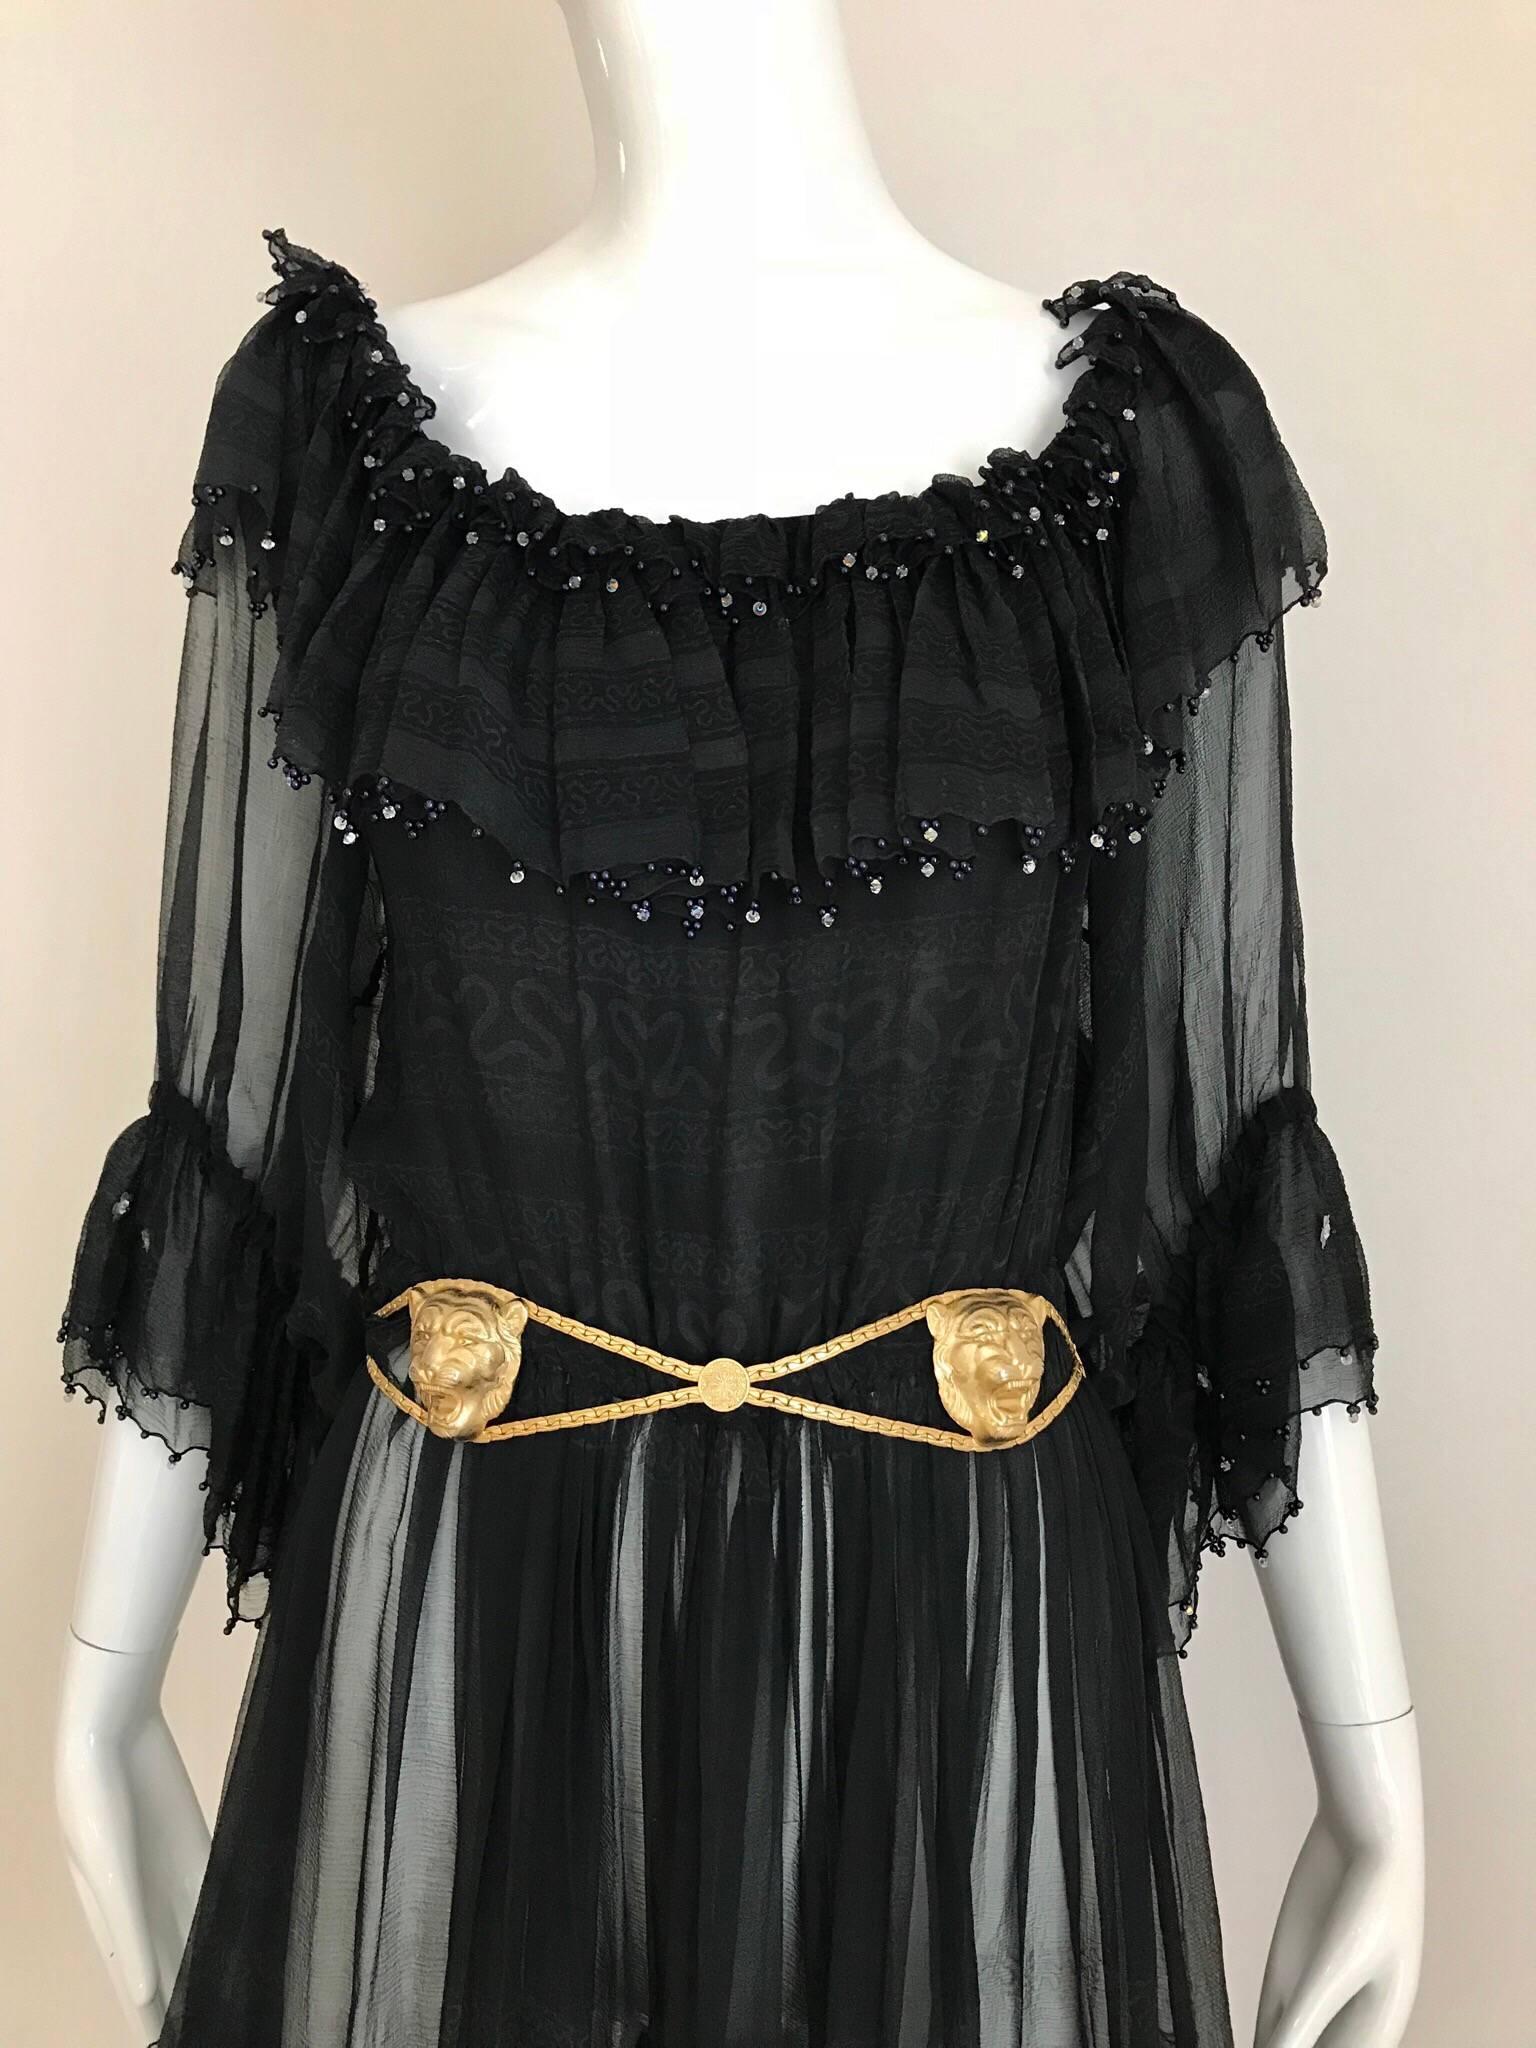 Late 70s Black Silk Zandra Rhodes off shoulder cocktail dress. elastic waist and elastic sleeve with ruffles. Belt is sold separately.
Fit size 4/6/8 Small to medium